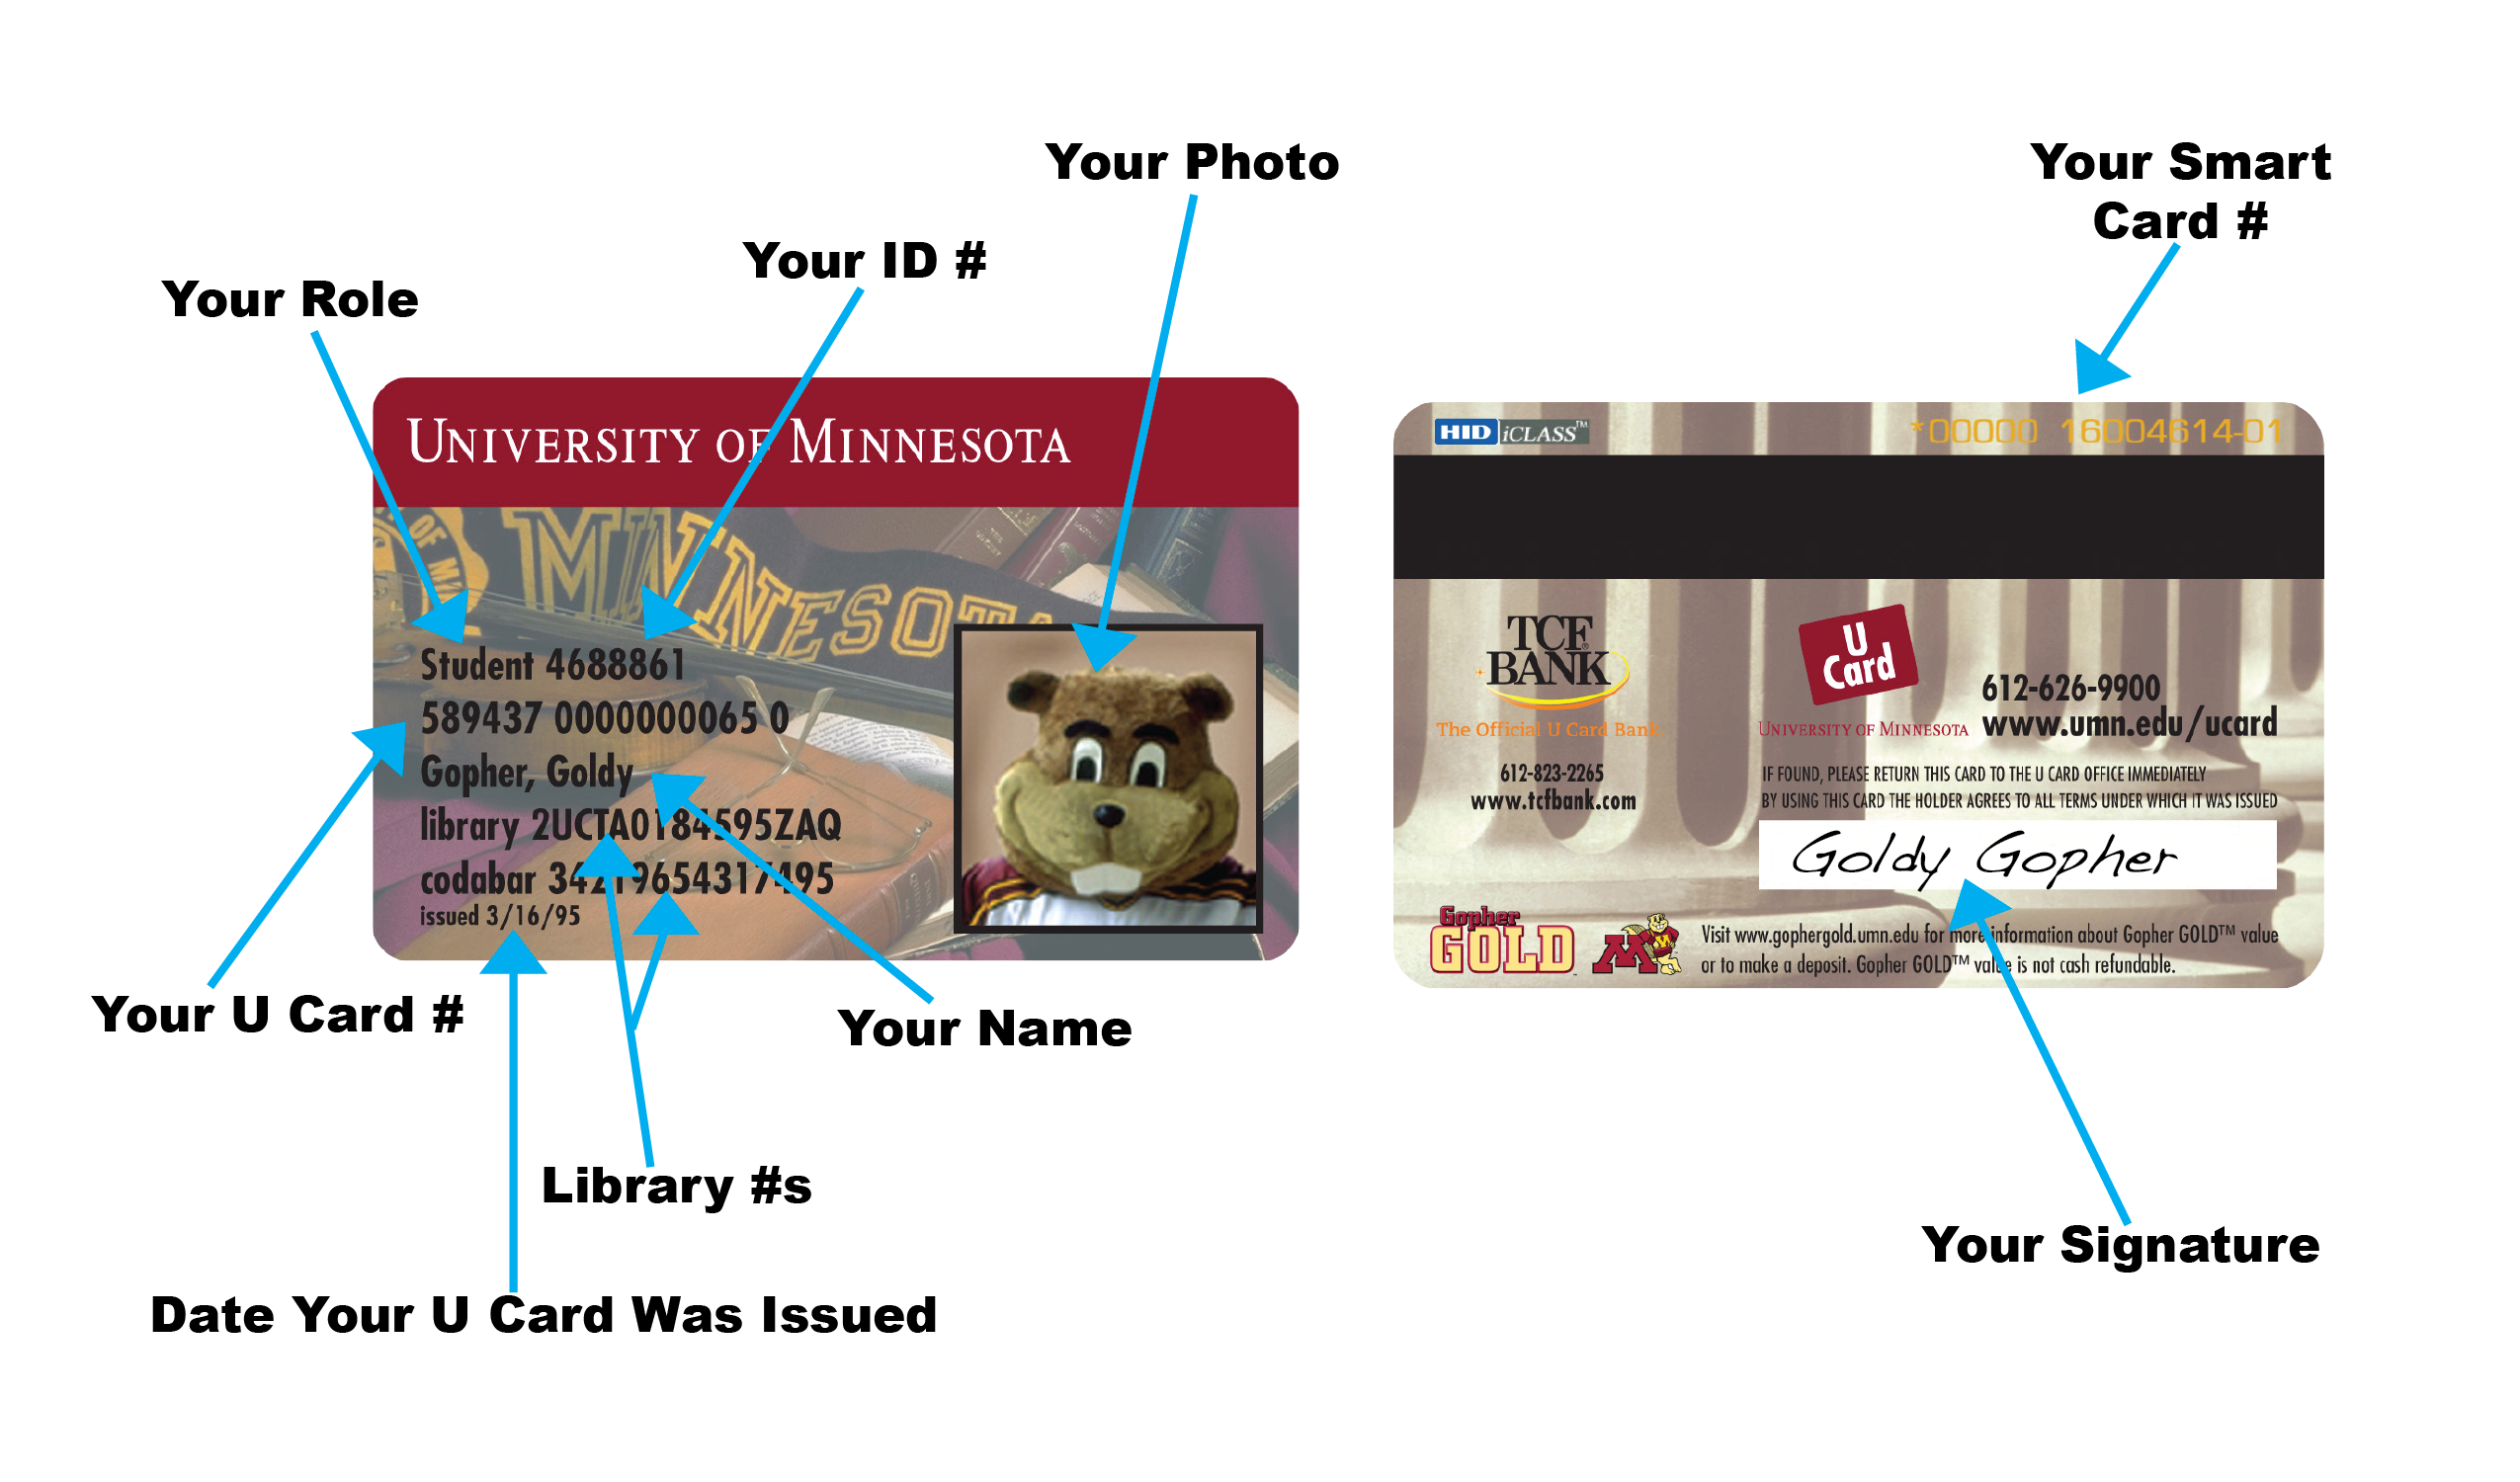 A diagram of the U Card design prior to 2015. The card is horizontal with lines of text. The first line is role and ID number, second is U Card number, third is name, fourth and fifth is library number, and sixth is the print date. The front also contains the photo of the cardholder. On the top right of the back is the smart card number.